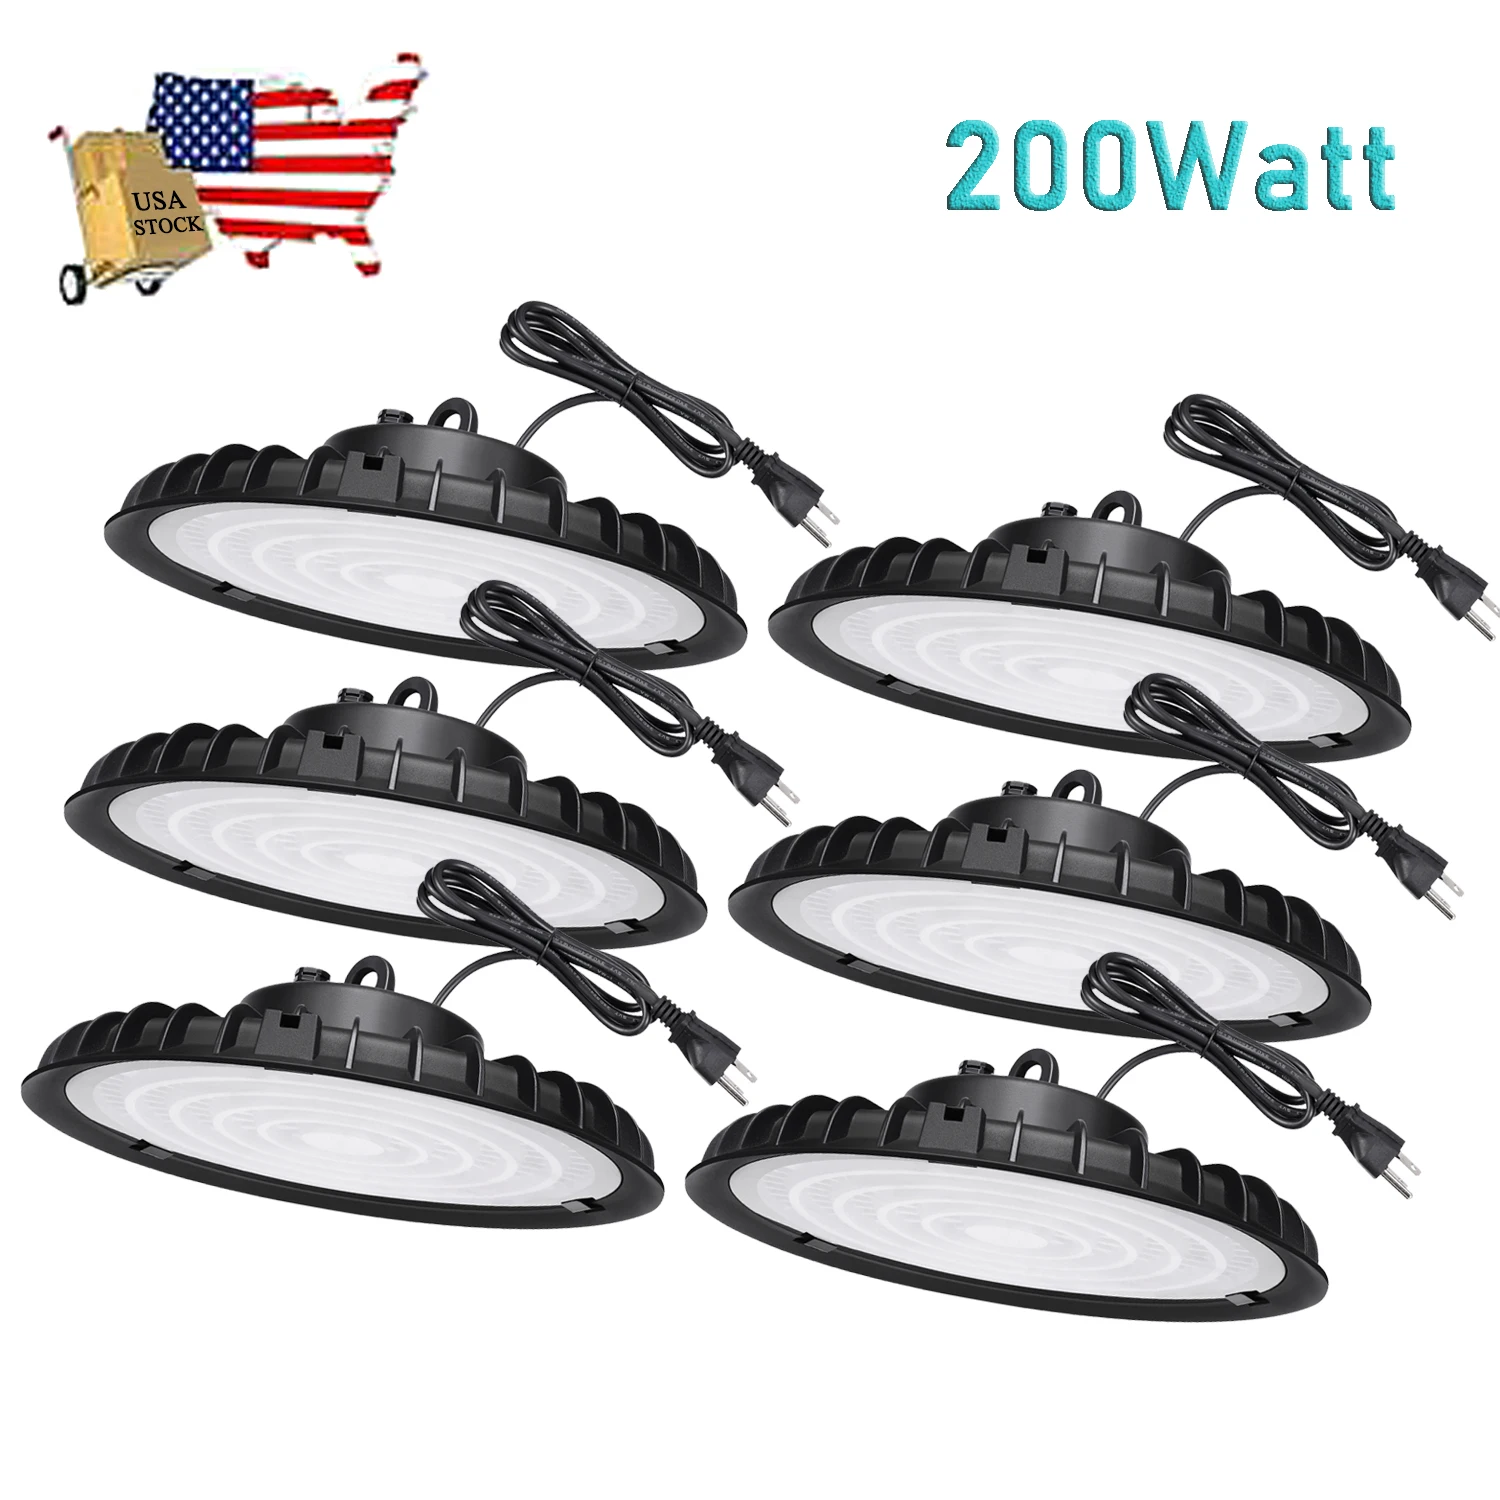 6 Pack 200 Watts UFO Led High Bay Light 200W Commercial Industrial Warehouse Factory Gym Workshop Lights 6000K US STOCK